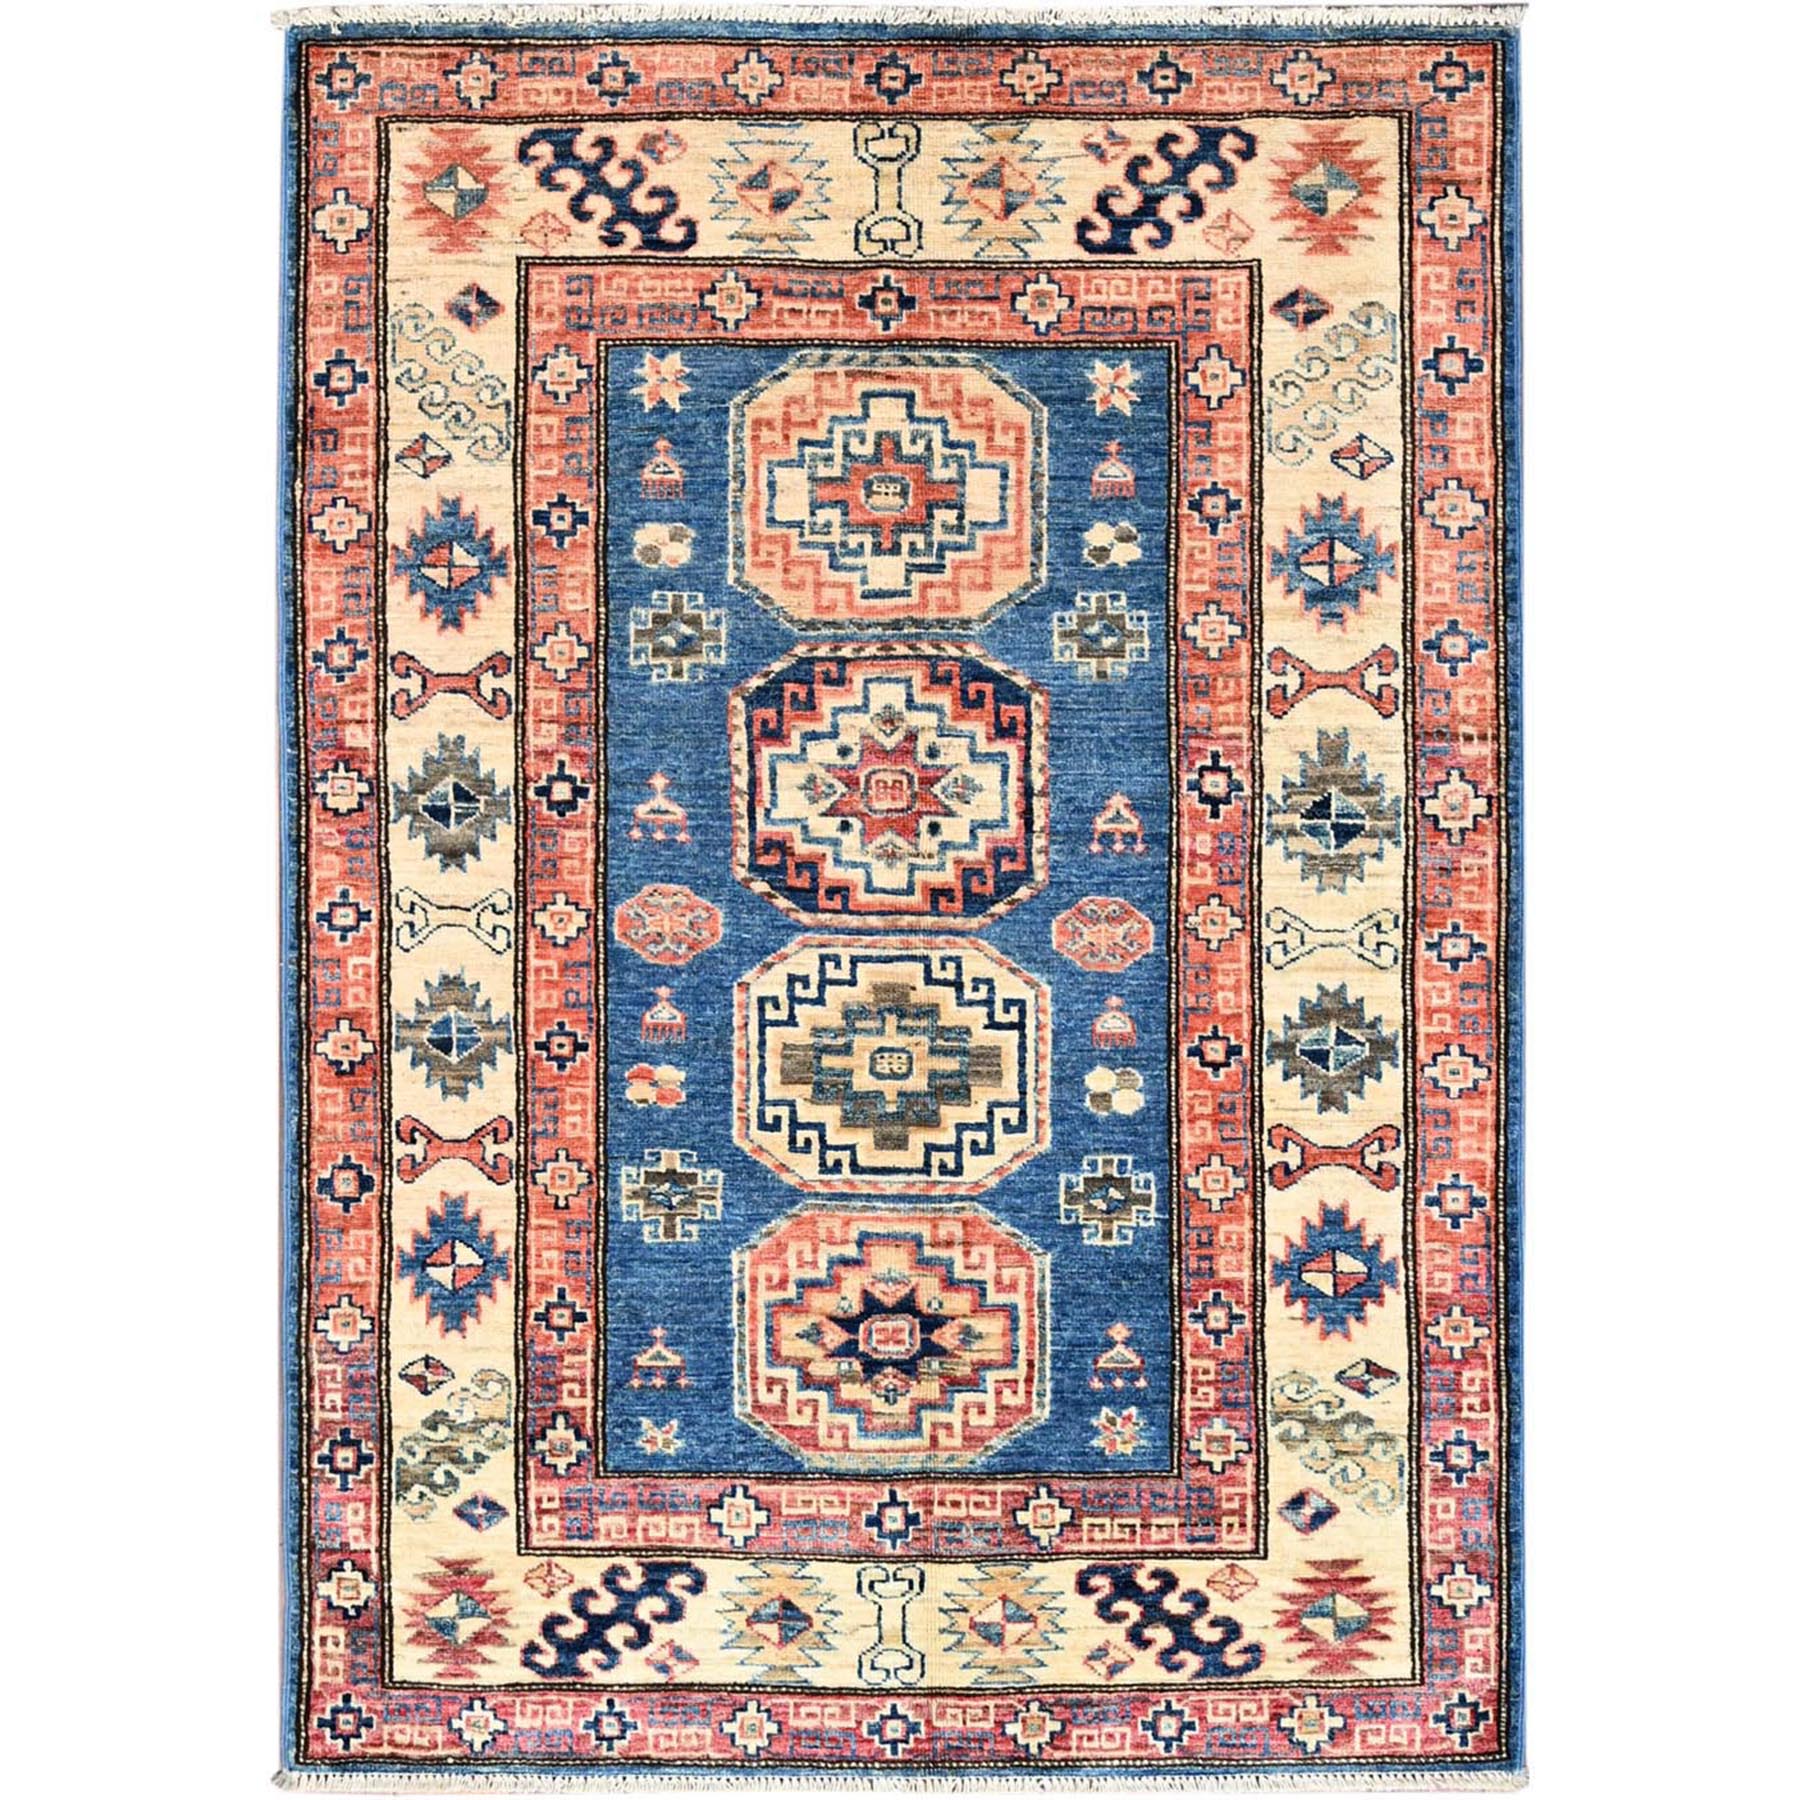  Wool Hand-Knotted Area Rug 3'5